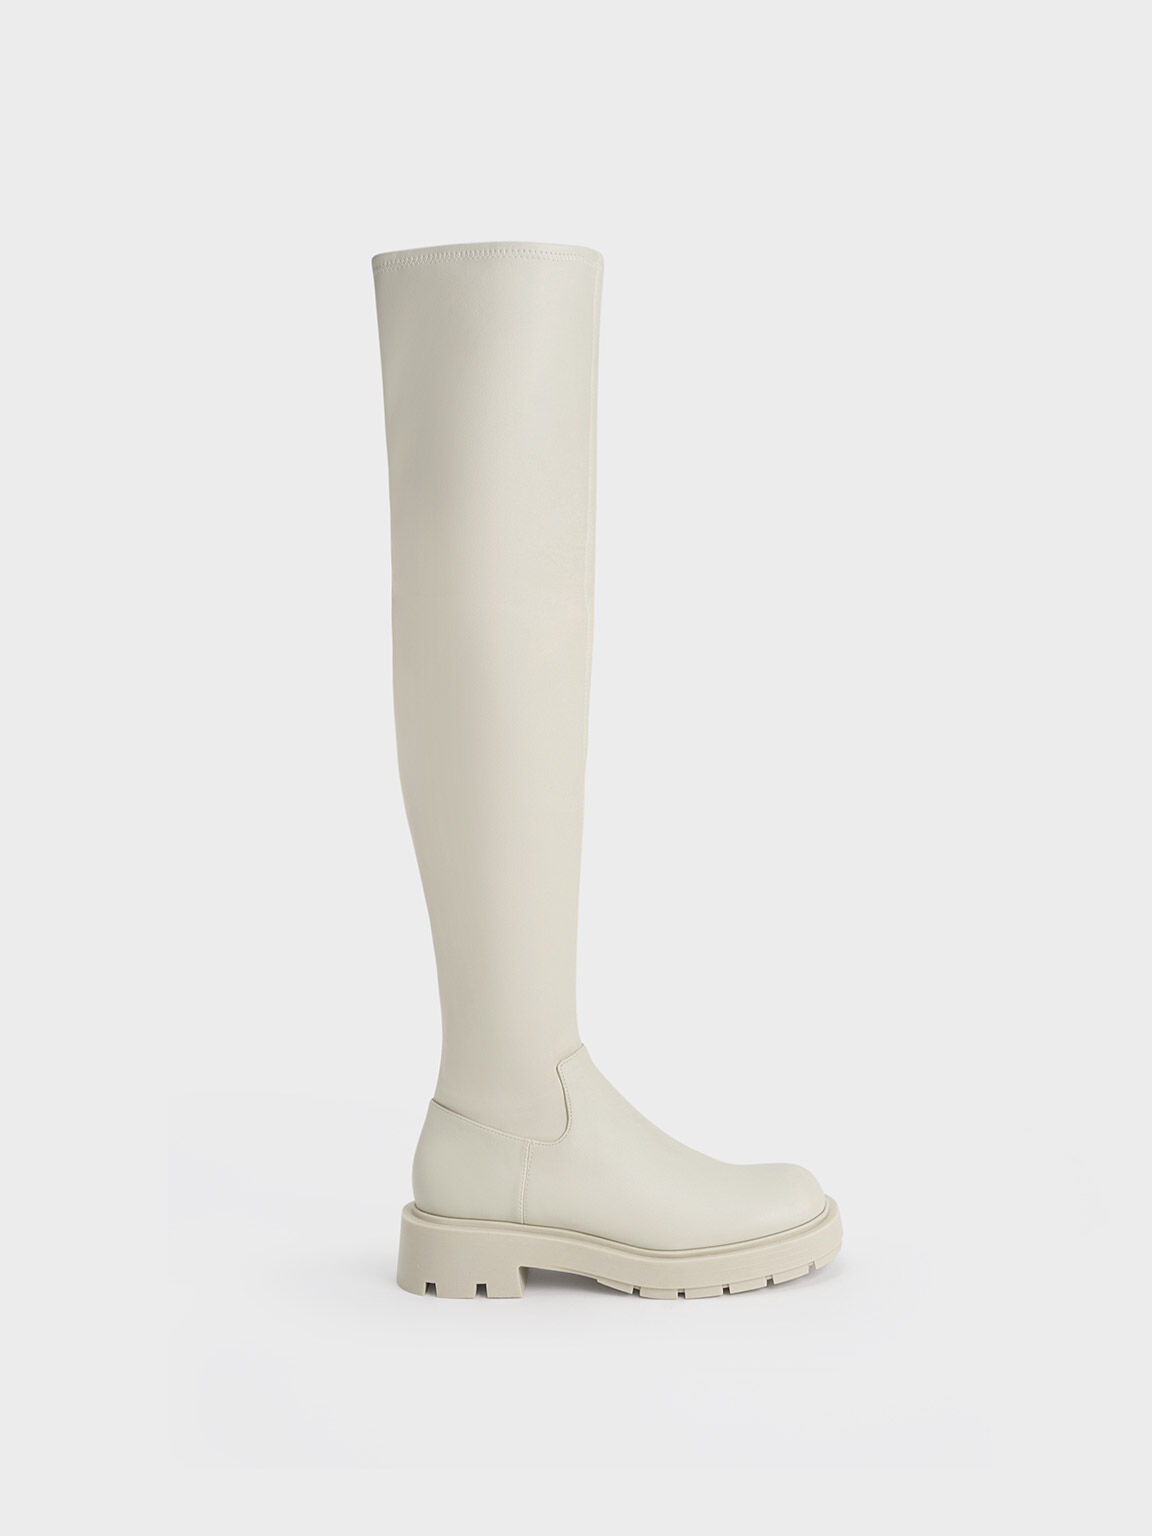 Chalk Boots - CHARLES & KEITH US